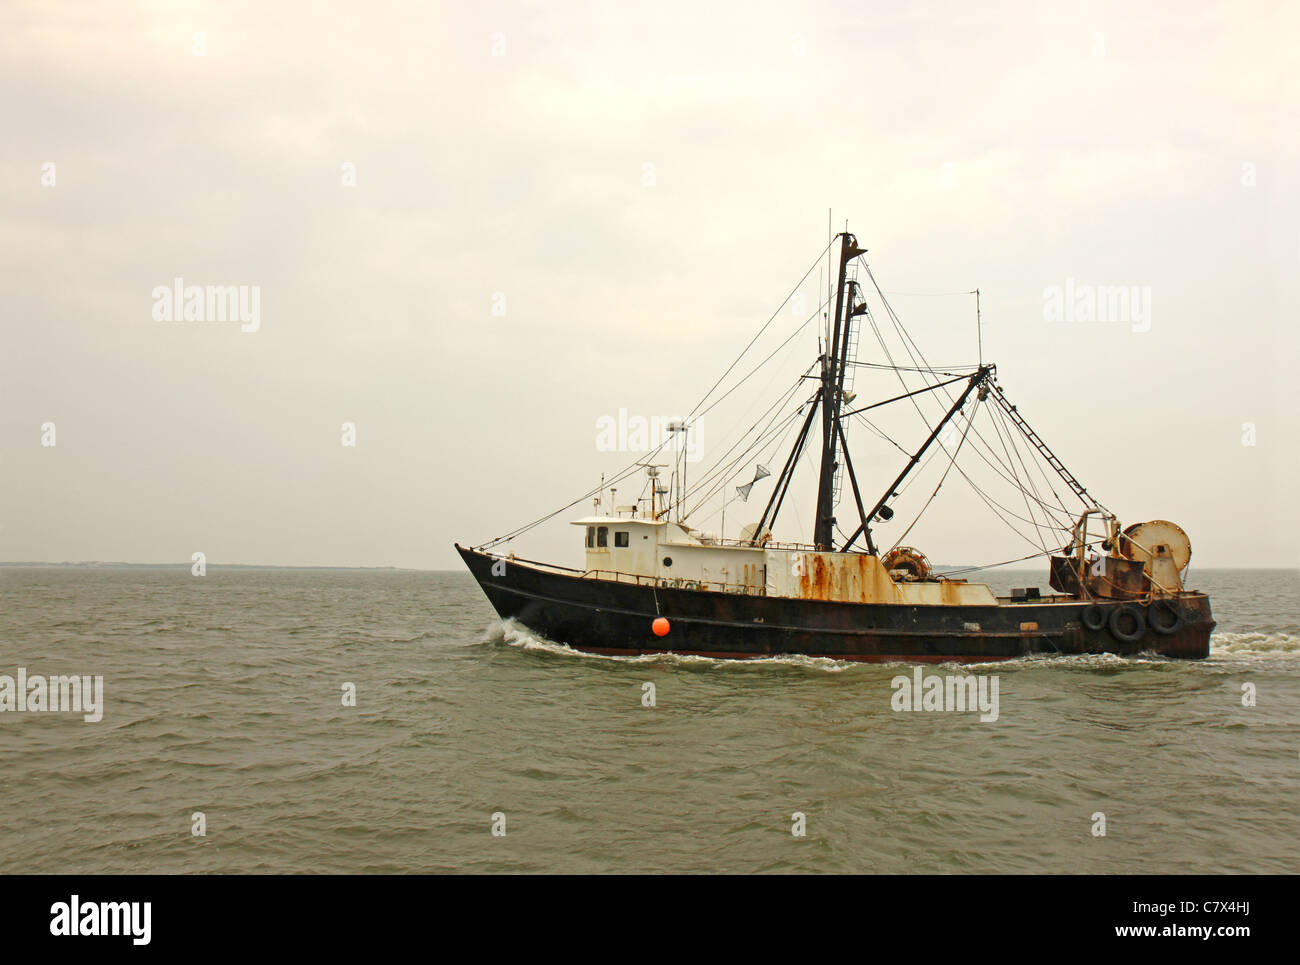 An old, rusty fishing trawler heads for home on Pamlico Sound, North Carolina against the gray mists of an early morning sky Stock Photo